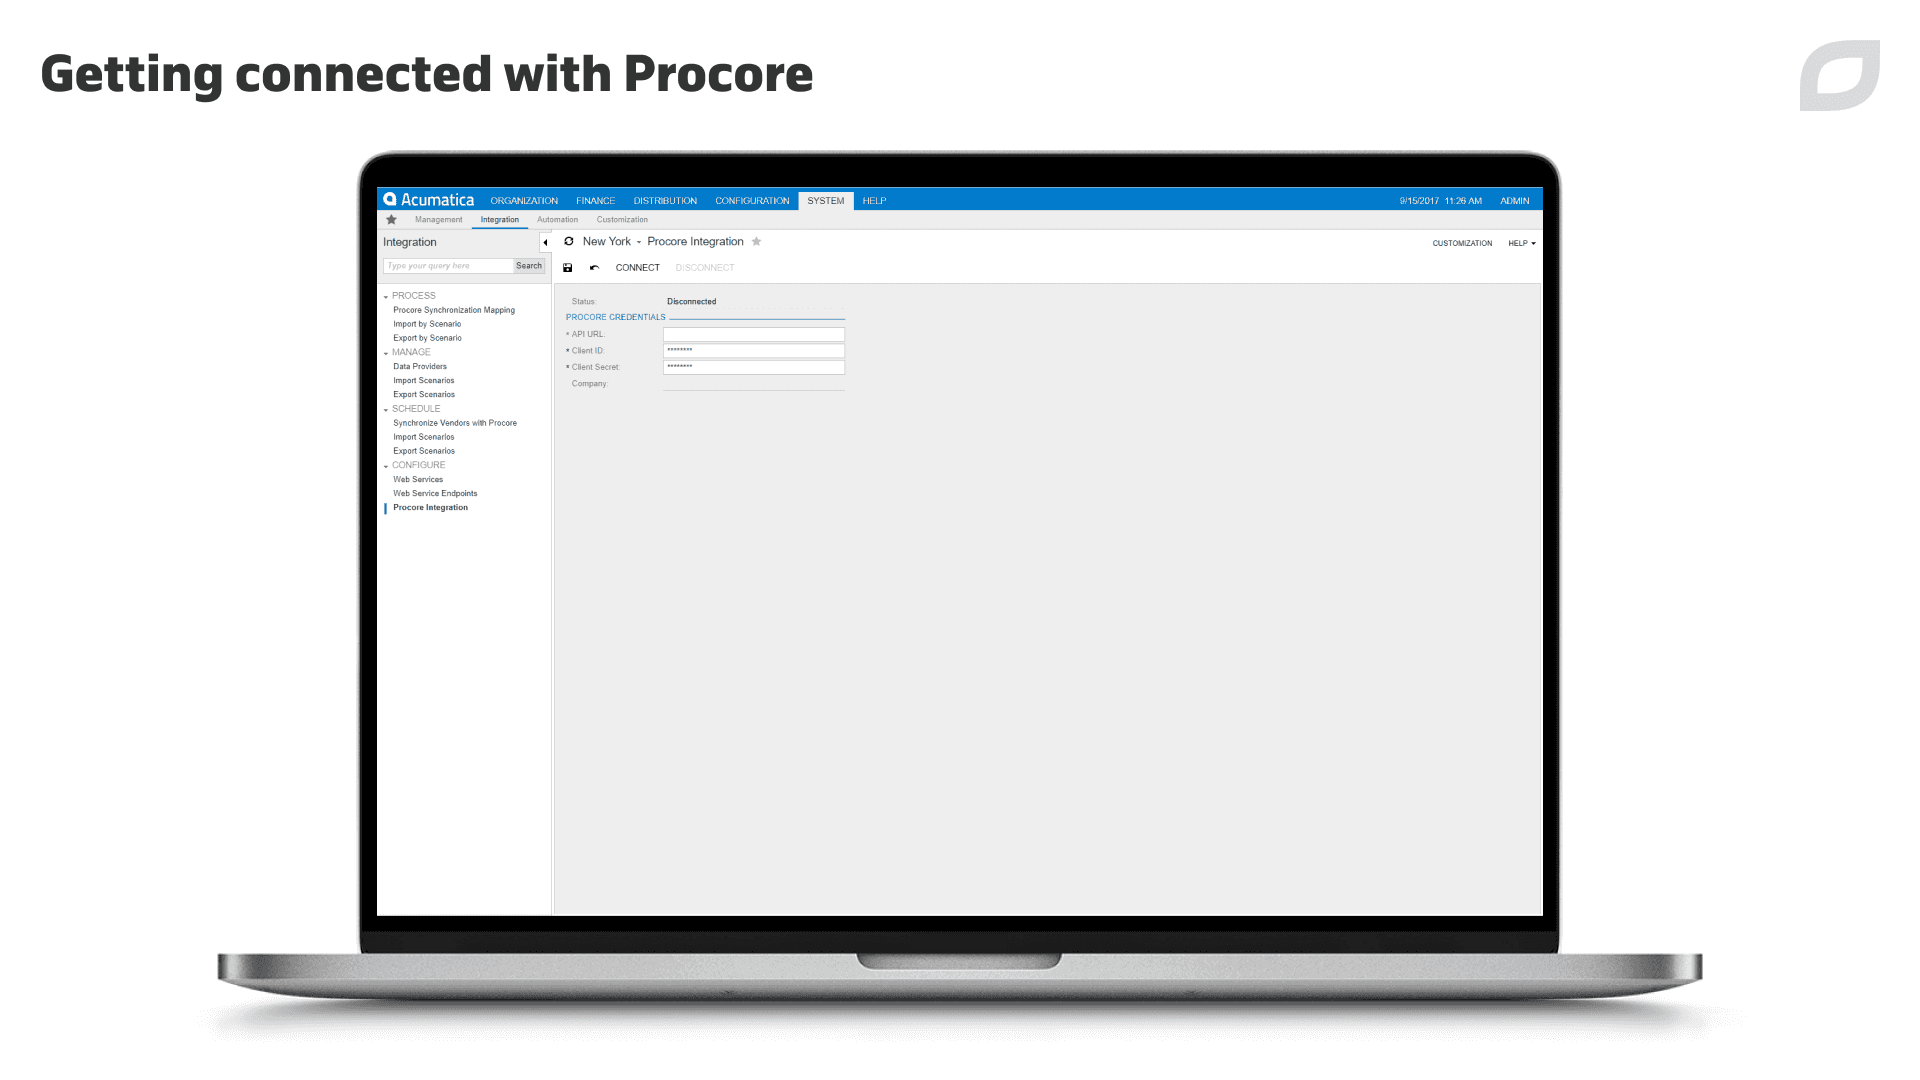 Connection with Procore